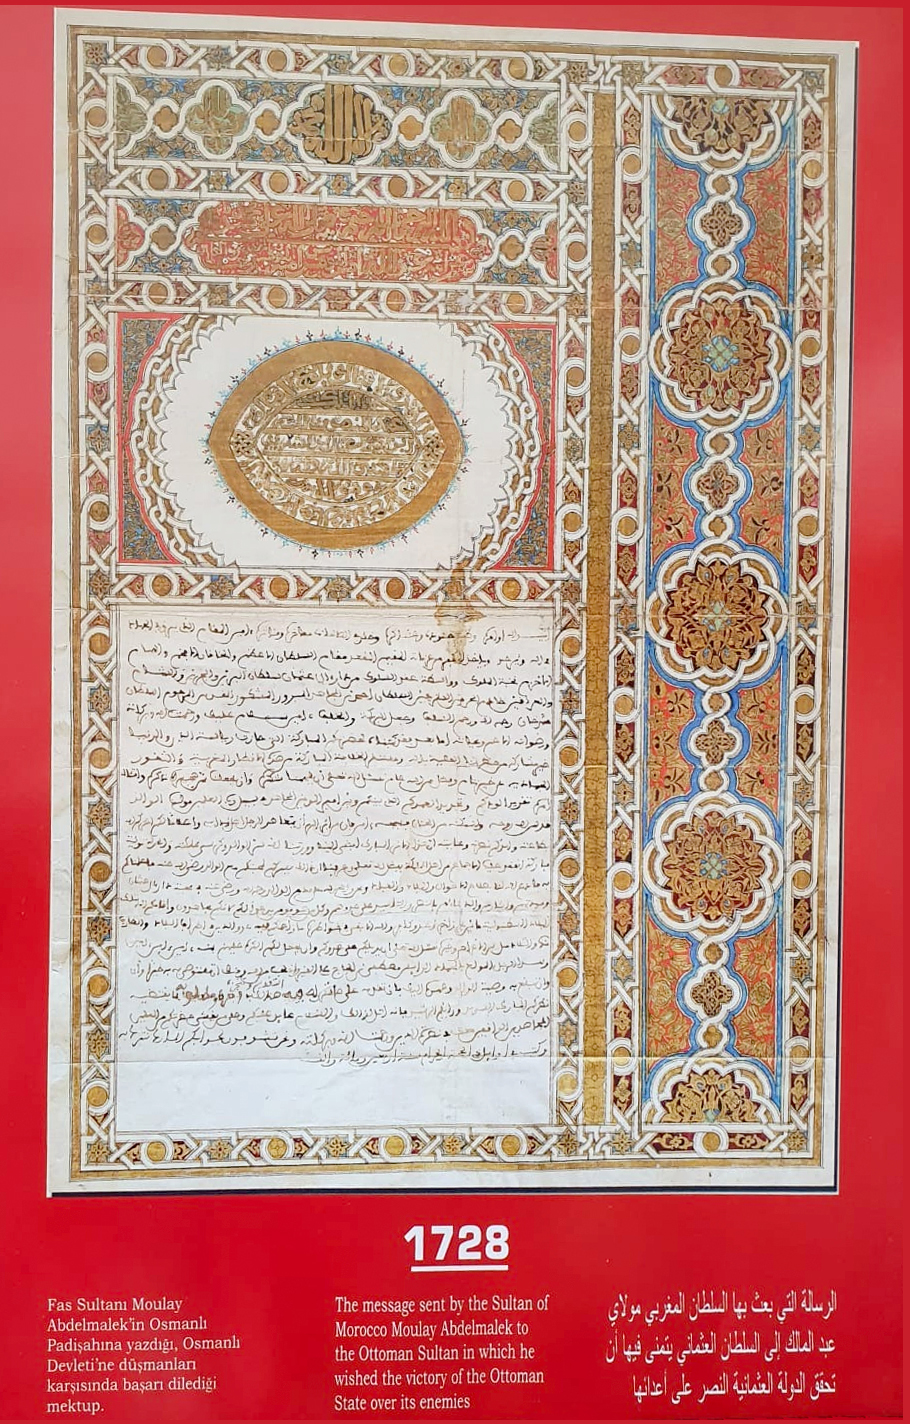 1728, The Message Sent by the Sultan of Morocco Moulay Abdelmalek to the Ottoman Sultan in which he Wished the Victory of the Ottoman State over its Enemies